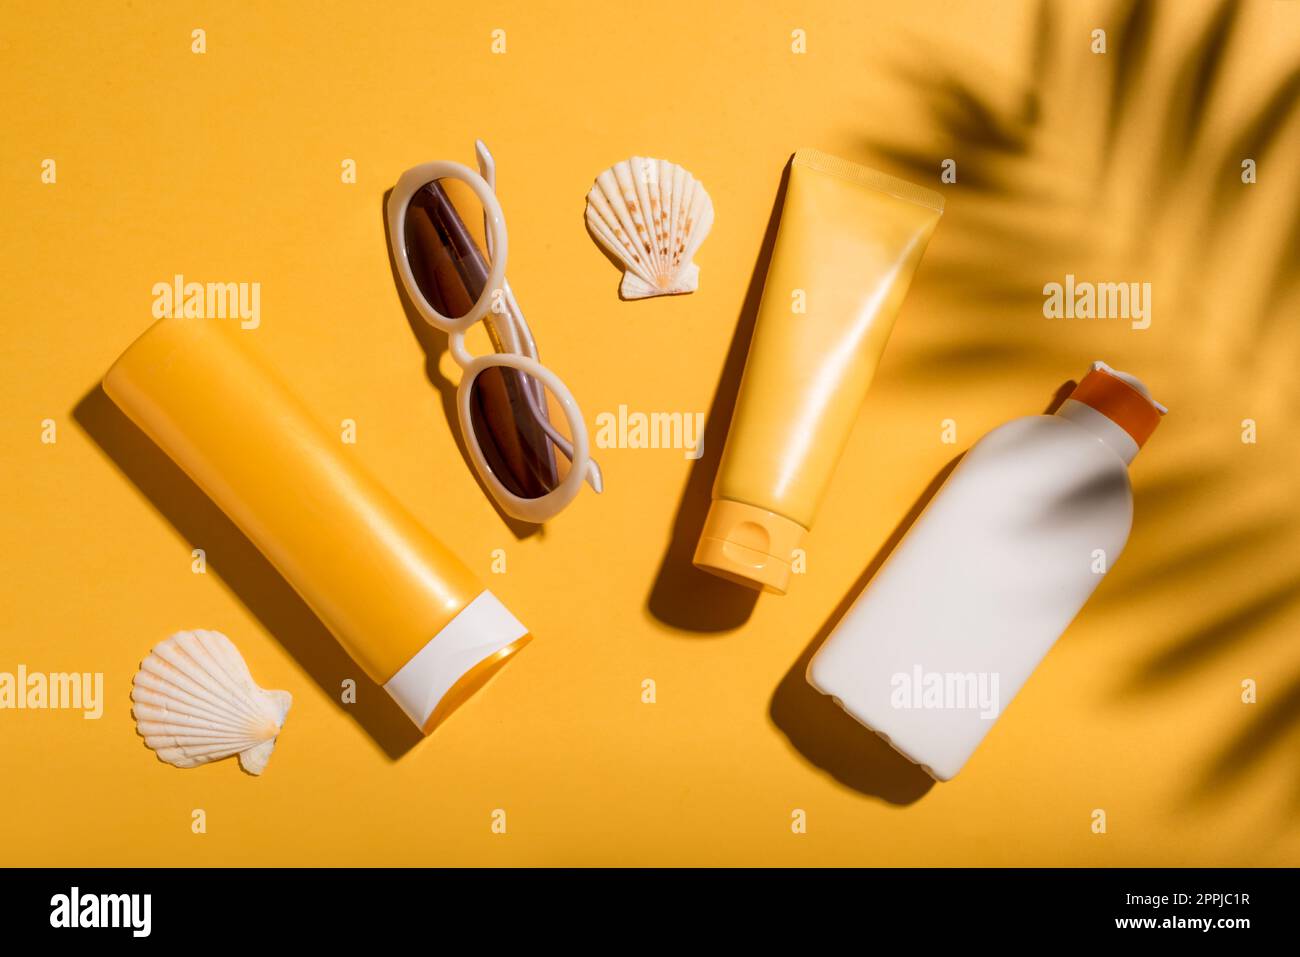 Sunblock lotion tubes and sunglasses on yellow background, top view. Summer vacation and skin care concept, sunscreen products, spf uv-protect cosmeti Stock Photo